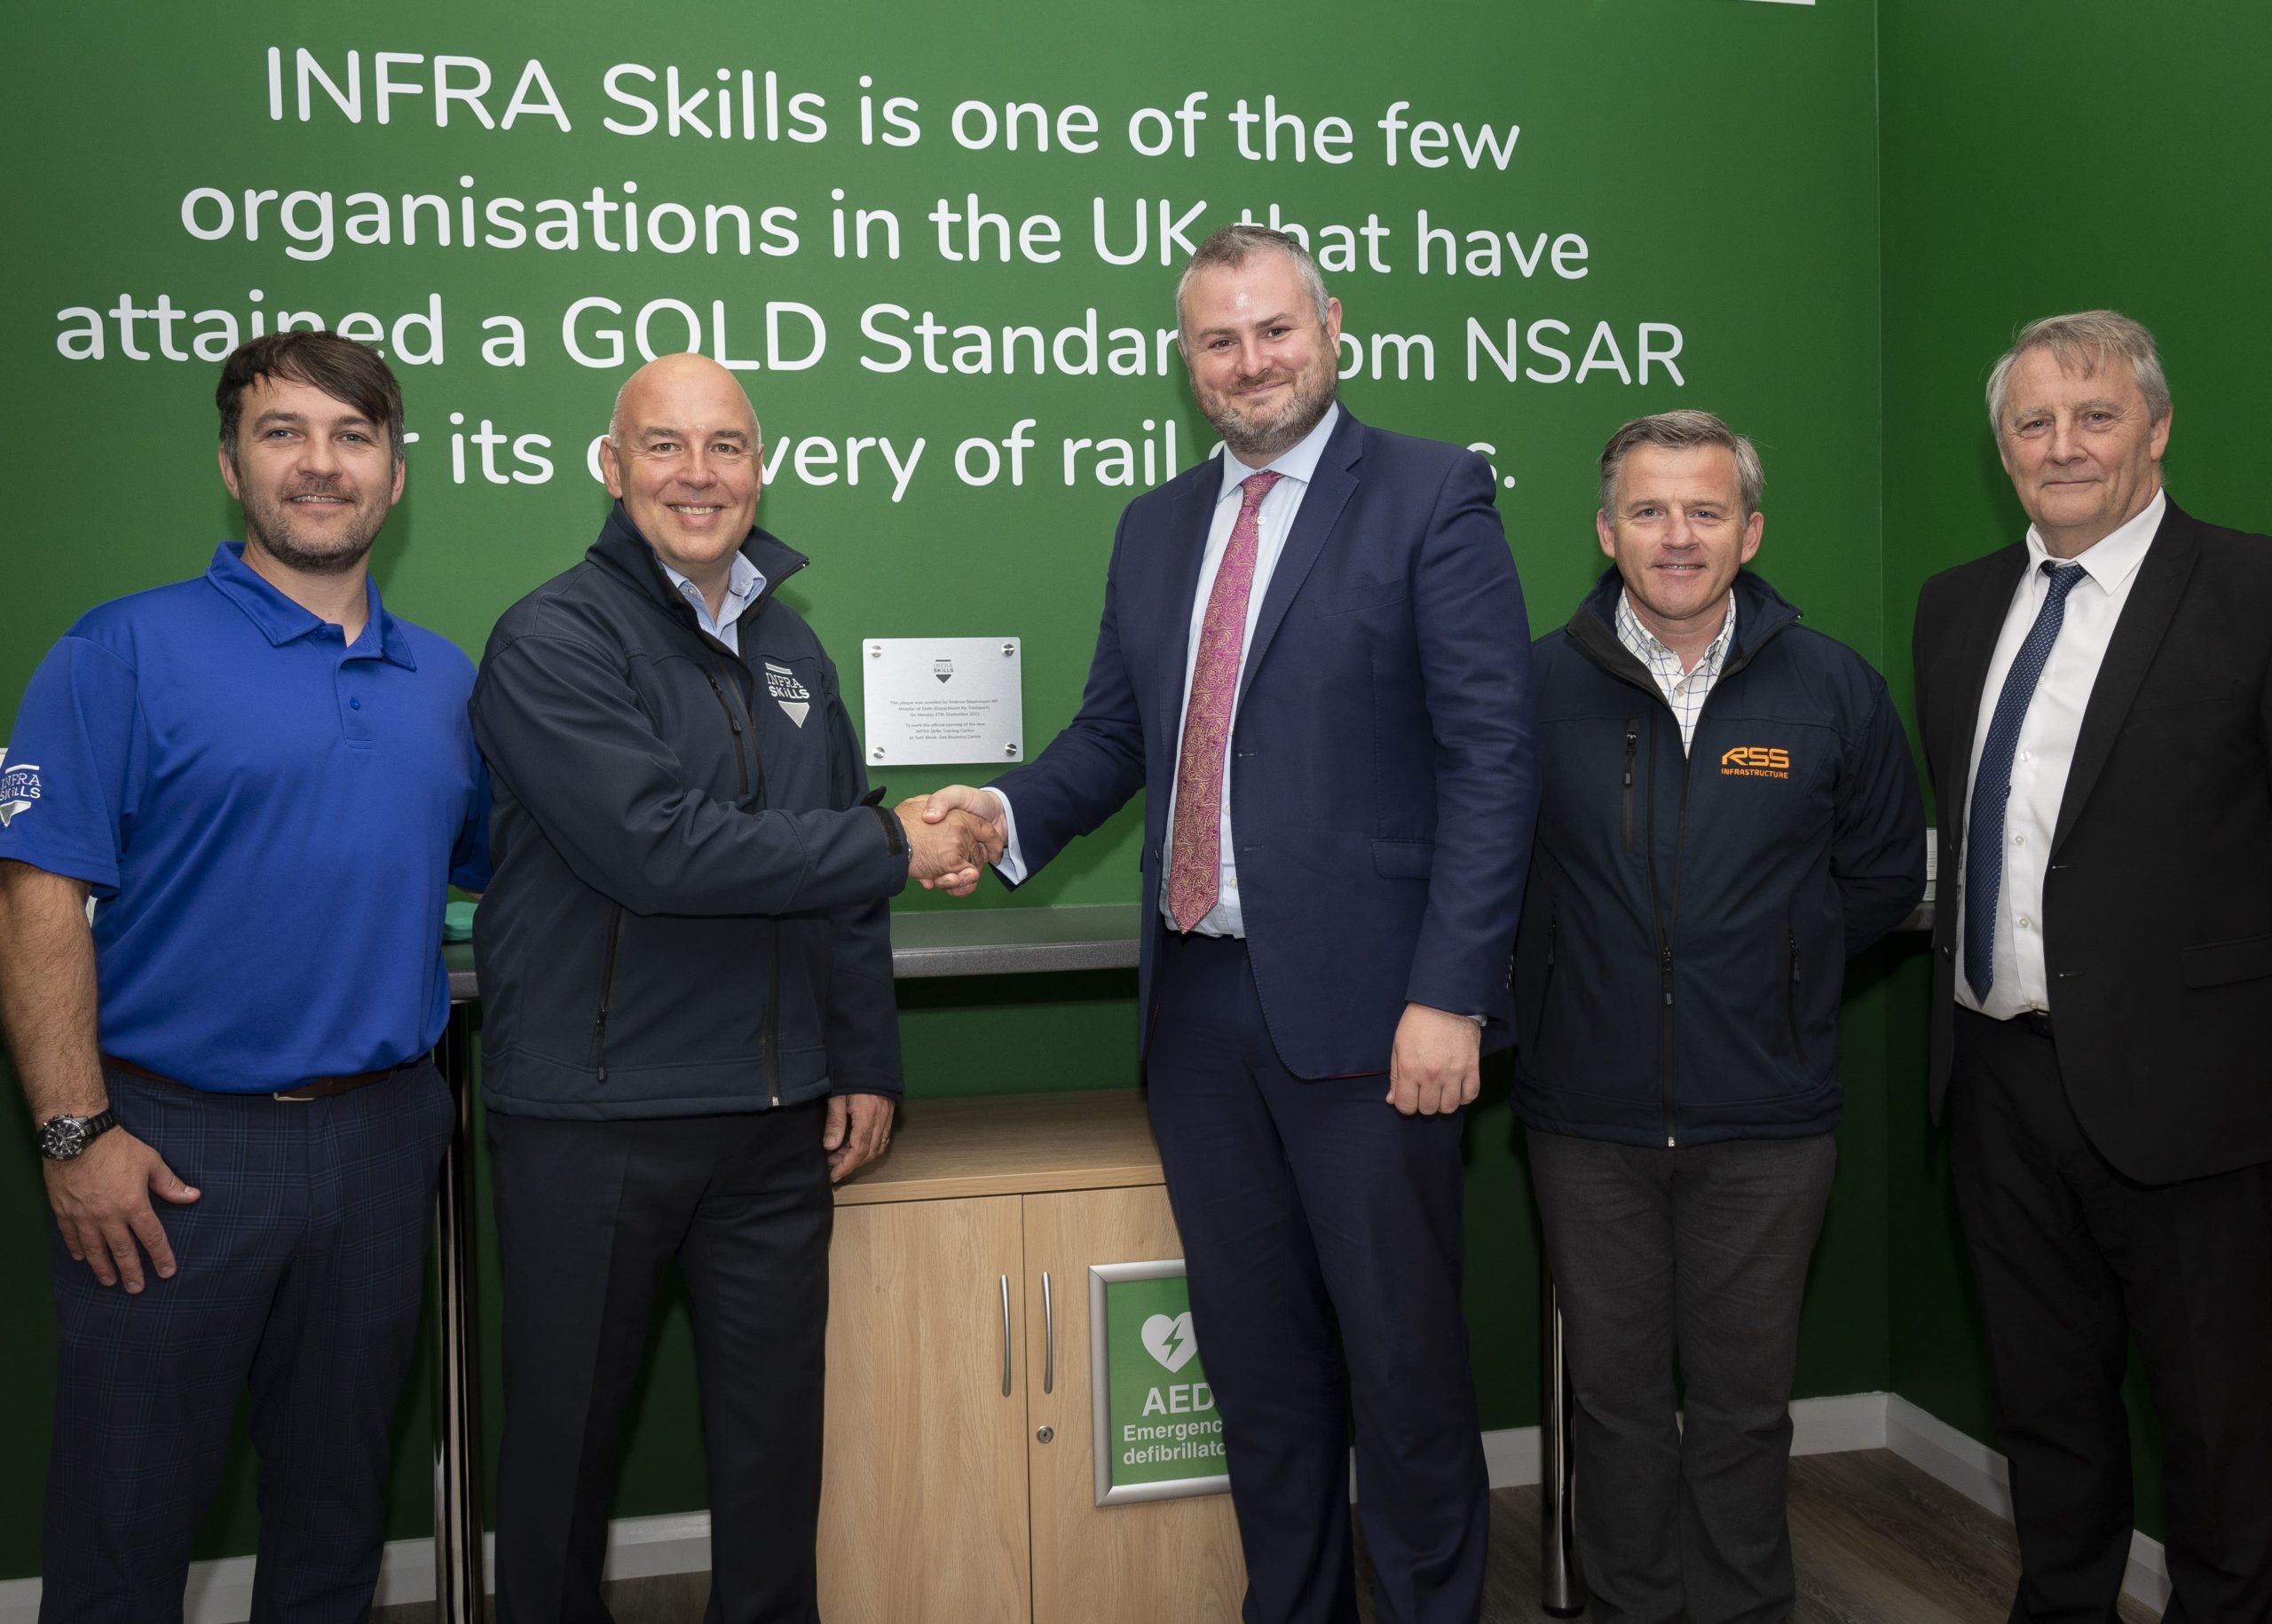 Richard Toy, CEO, Sean Harrison, Managing Director, Peter Thompson, Rail Director, and Steven Morley, General Manager are pictured with Andrew Stephenson.